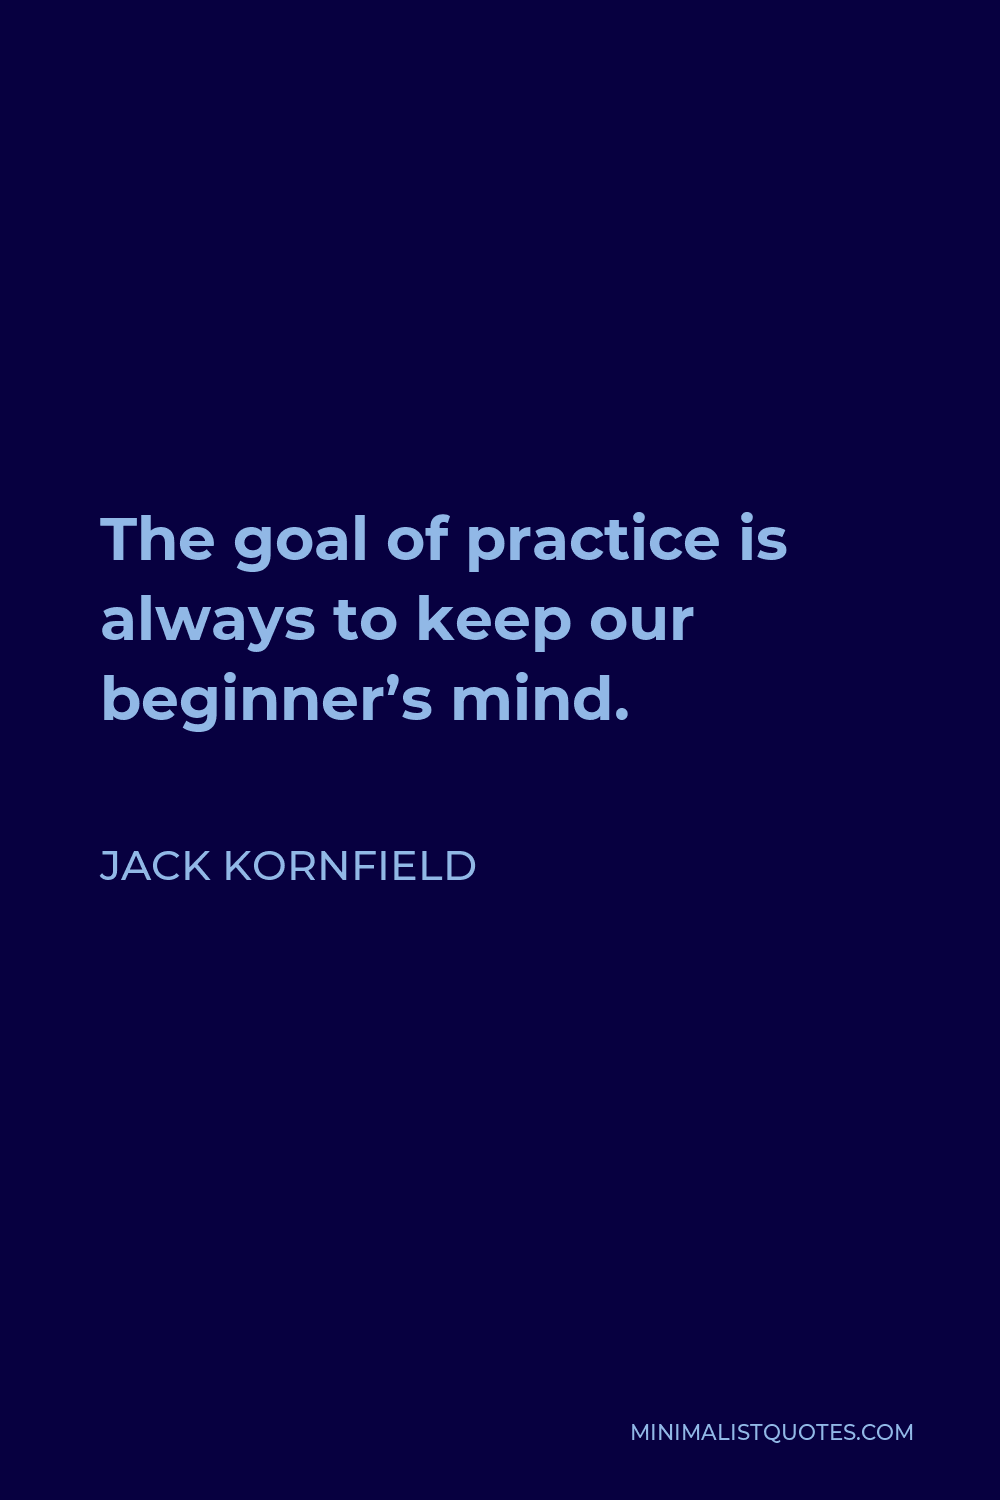 Jack Kornfield Quote - The goal of practice is always to keep our beginner’s mind.